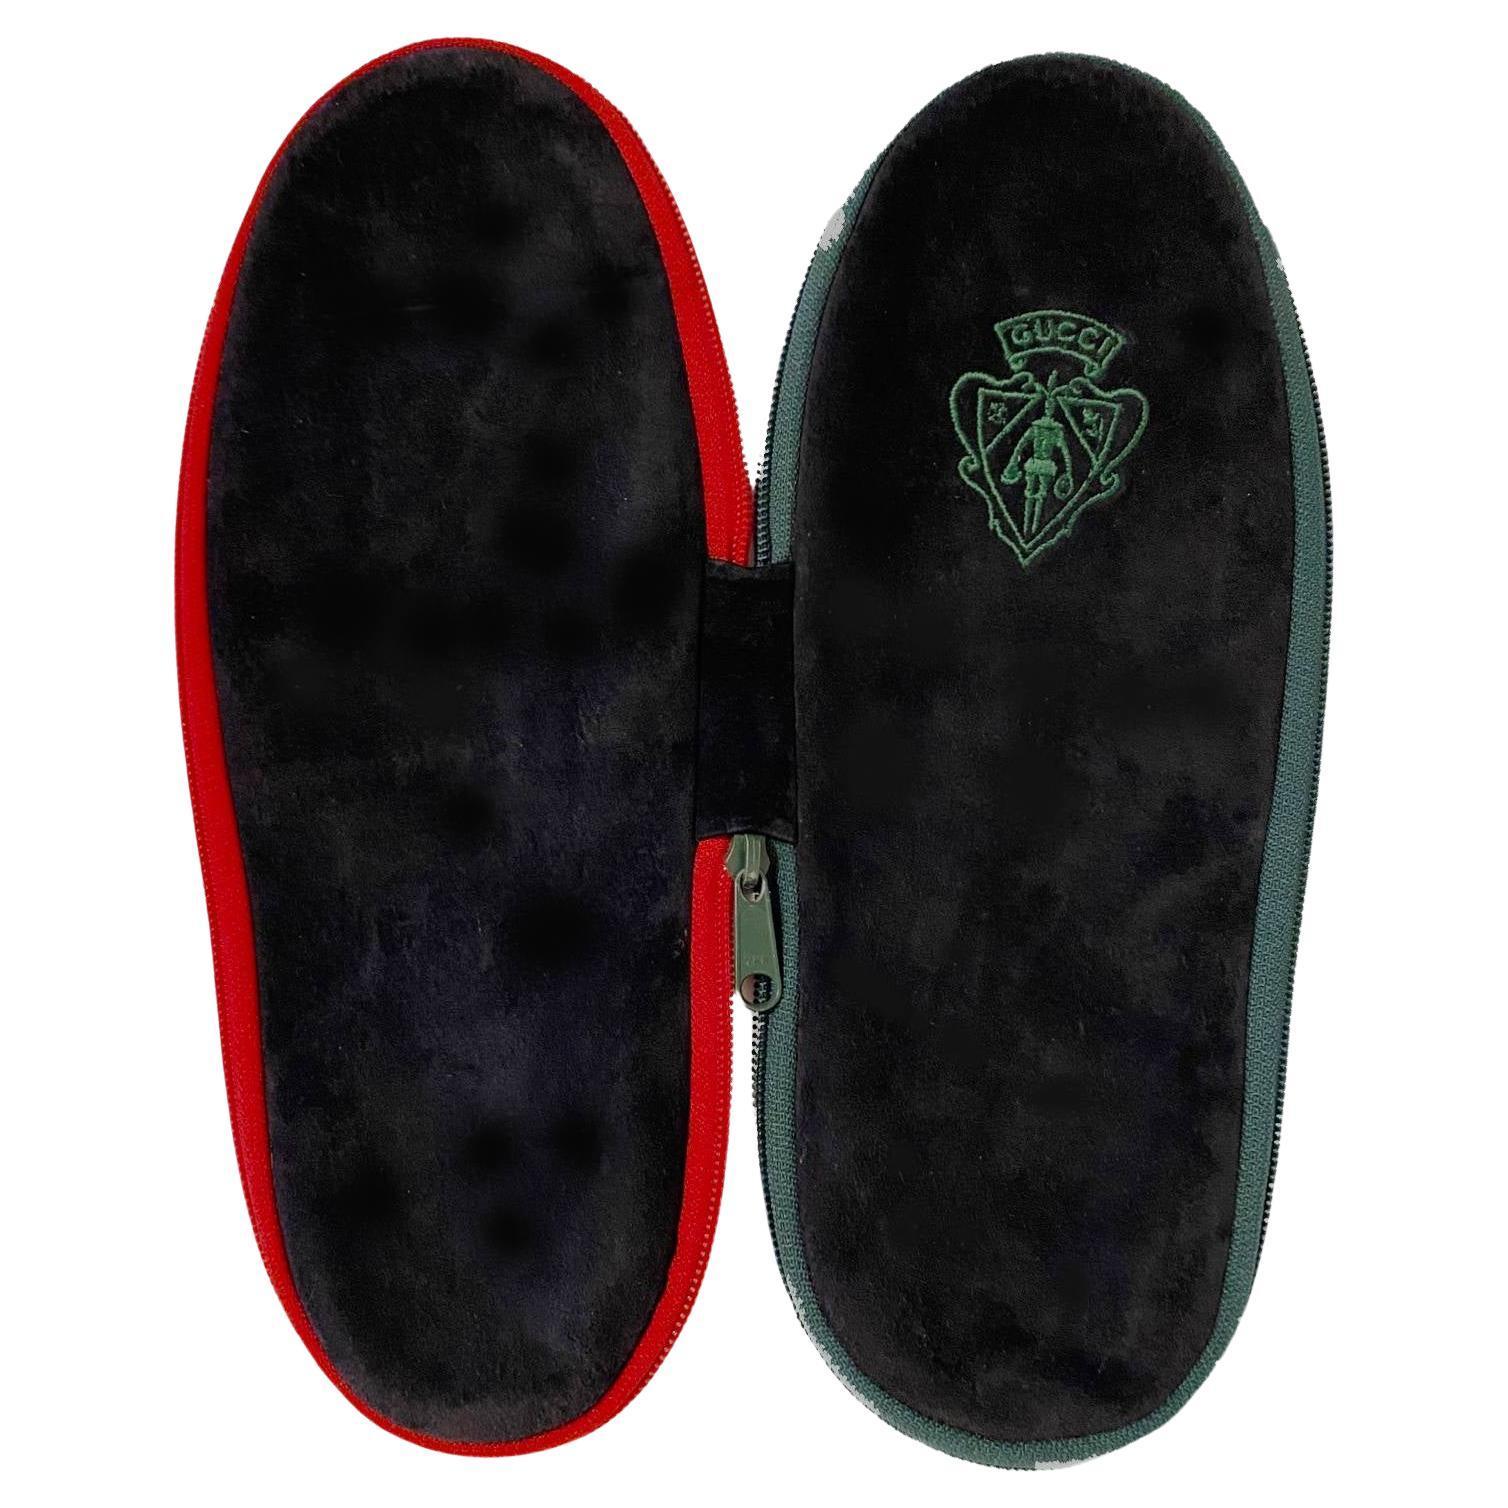 1980s Gucci Black Suede Slippers Travel zipped case,  This travel case serves as a fashionable way to protect your essentials while on the go. The timeless style of Gucci's classic black suede is sure to be admired.

Condition: 1980s, vintage, very